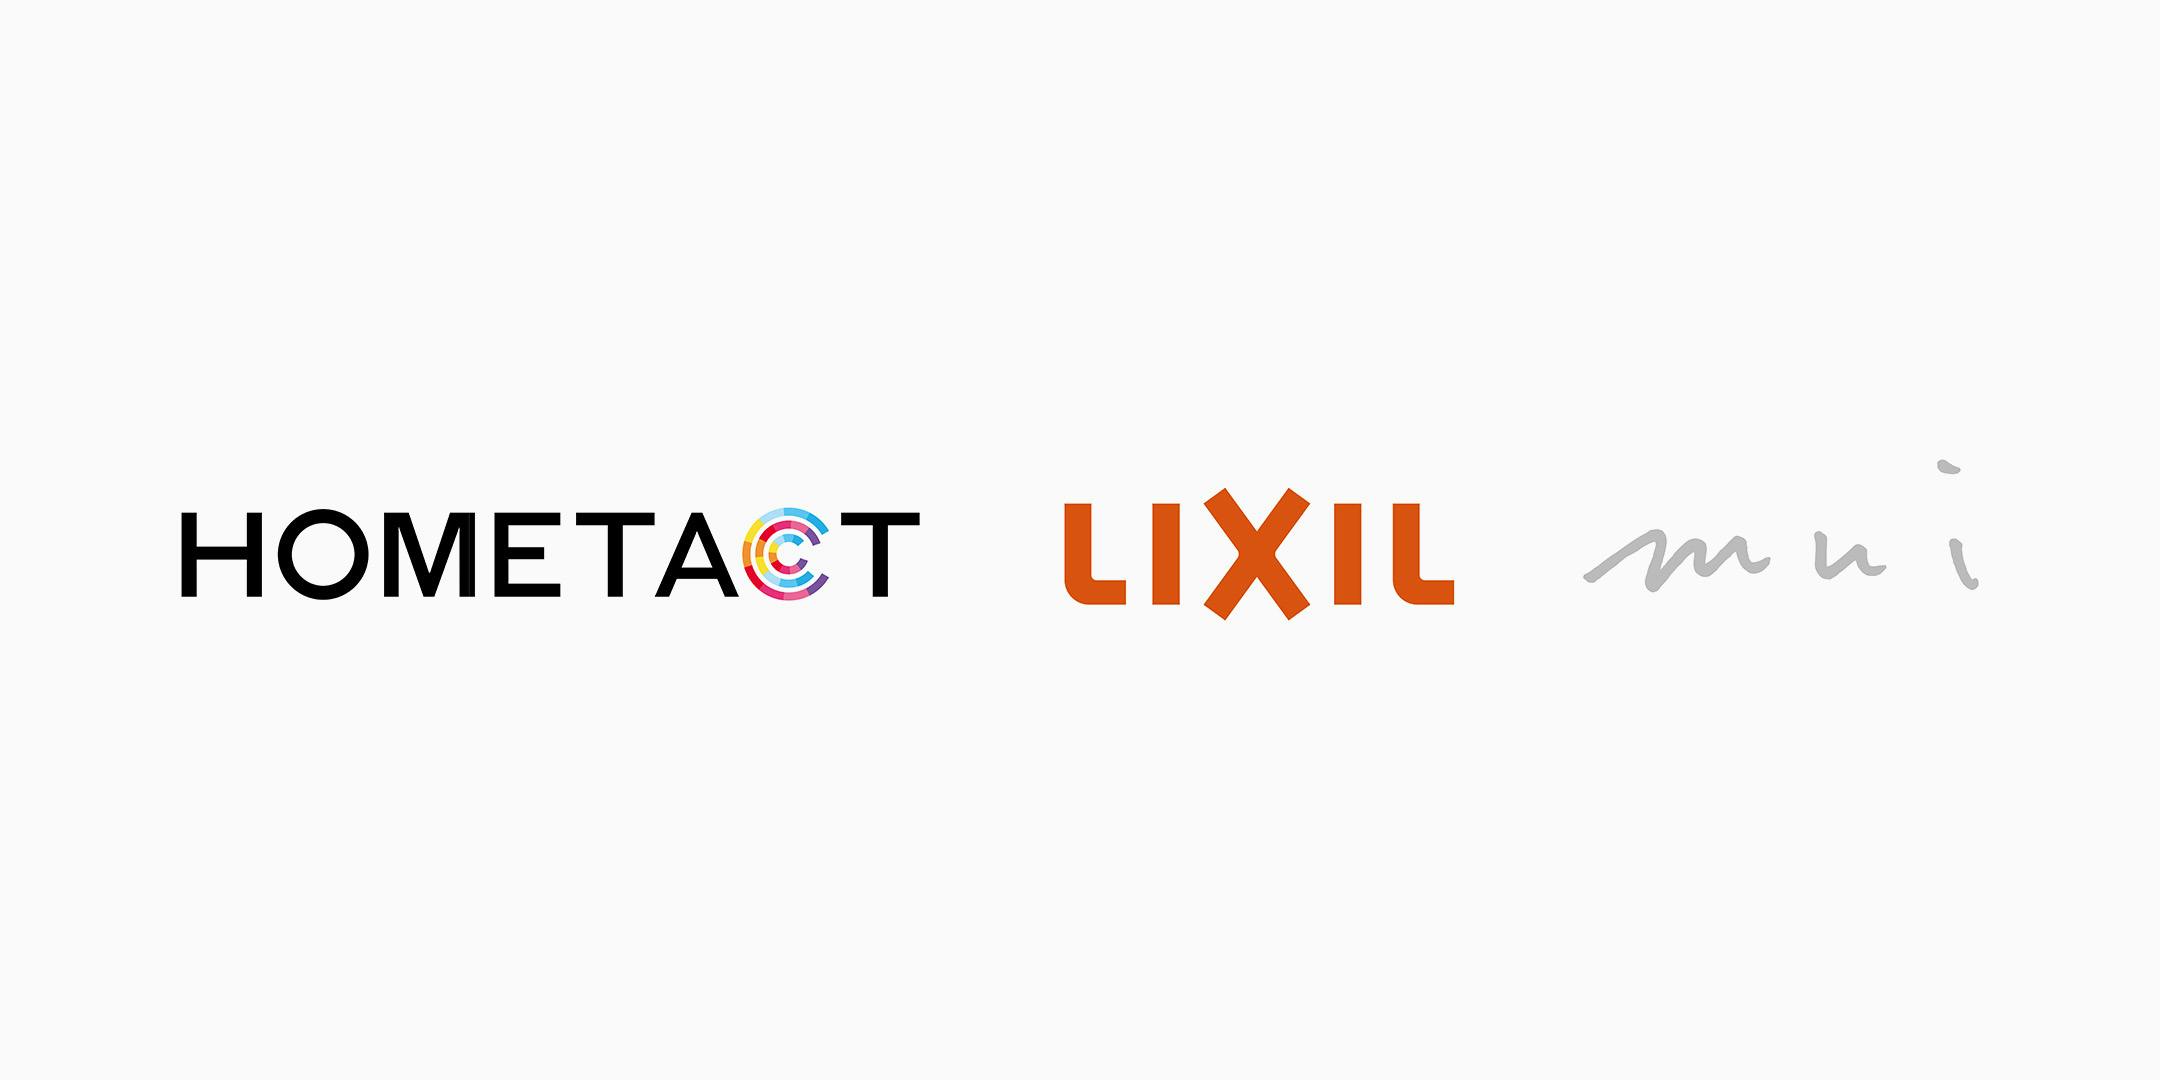 Alliance signed between Mitsubishi Estate, LIXIL, and mui Lab in the Smart Home Business Domain.